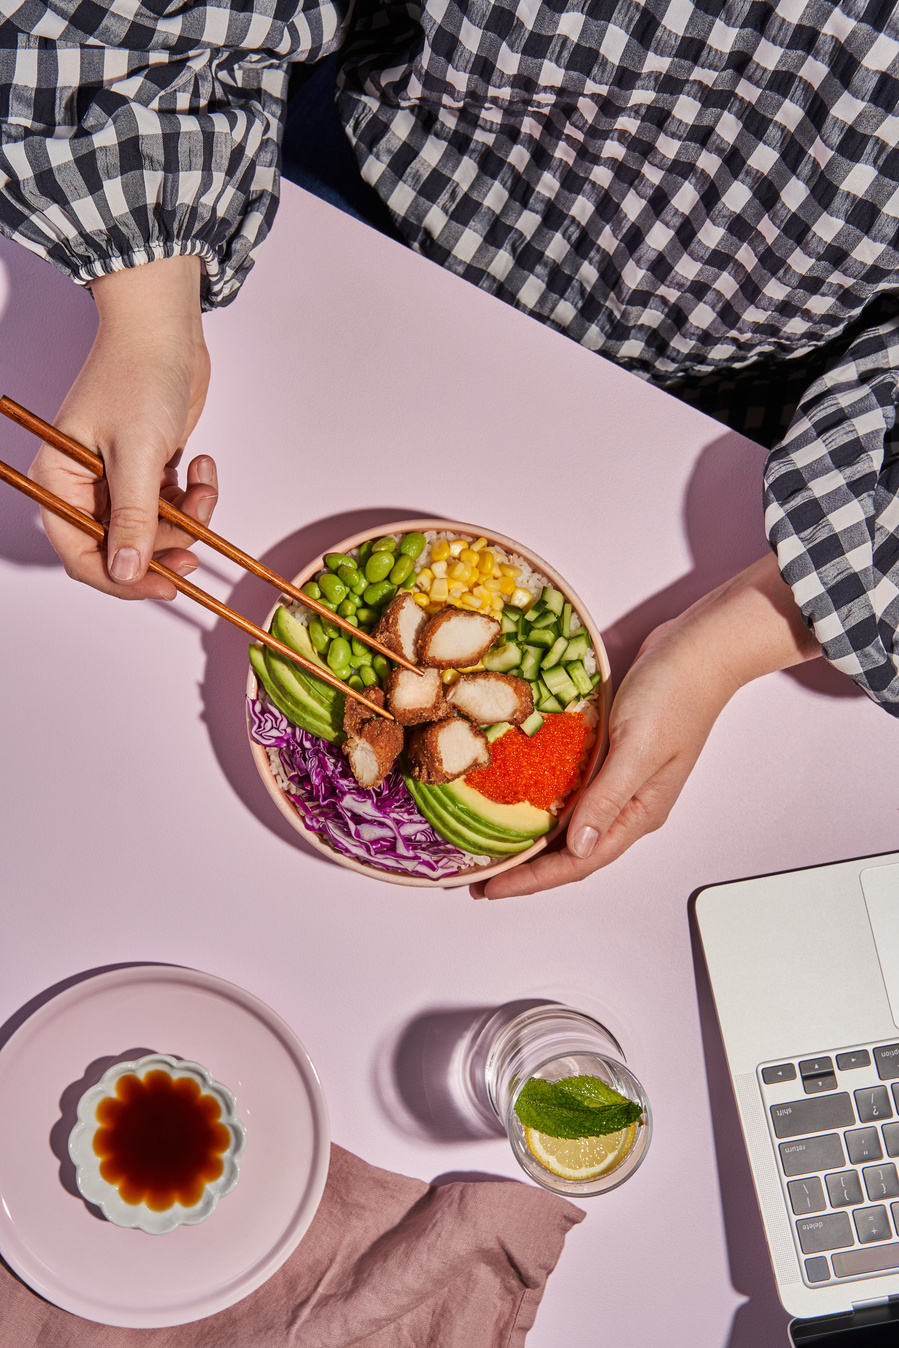 hands holding a poke bowl on a pink table with laptop, a drink and soy sauce in the frame